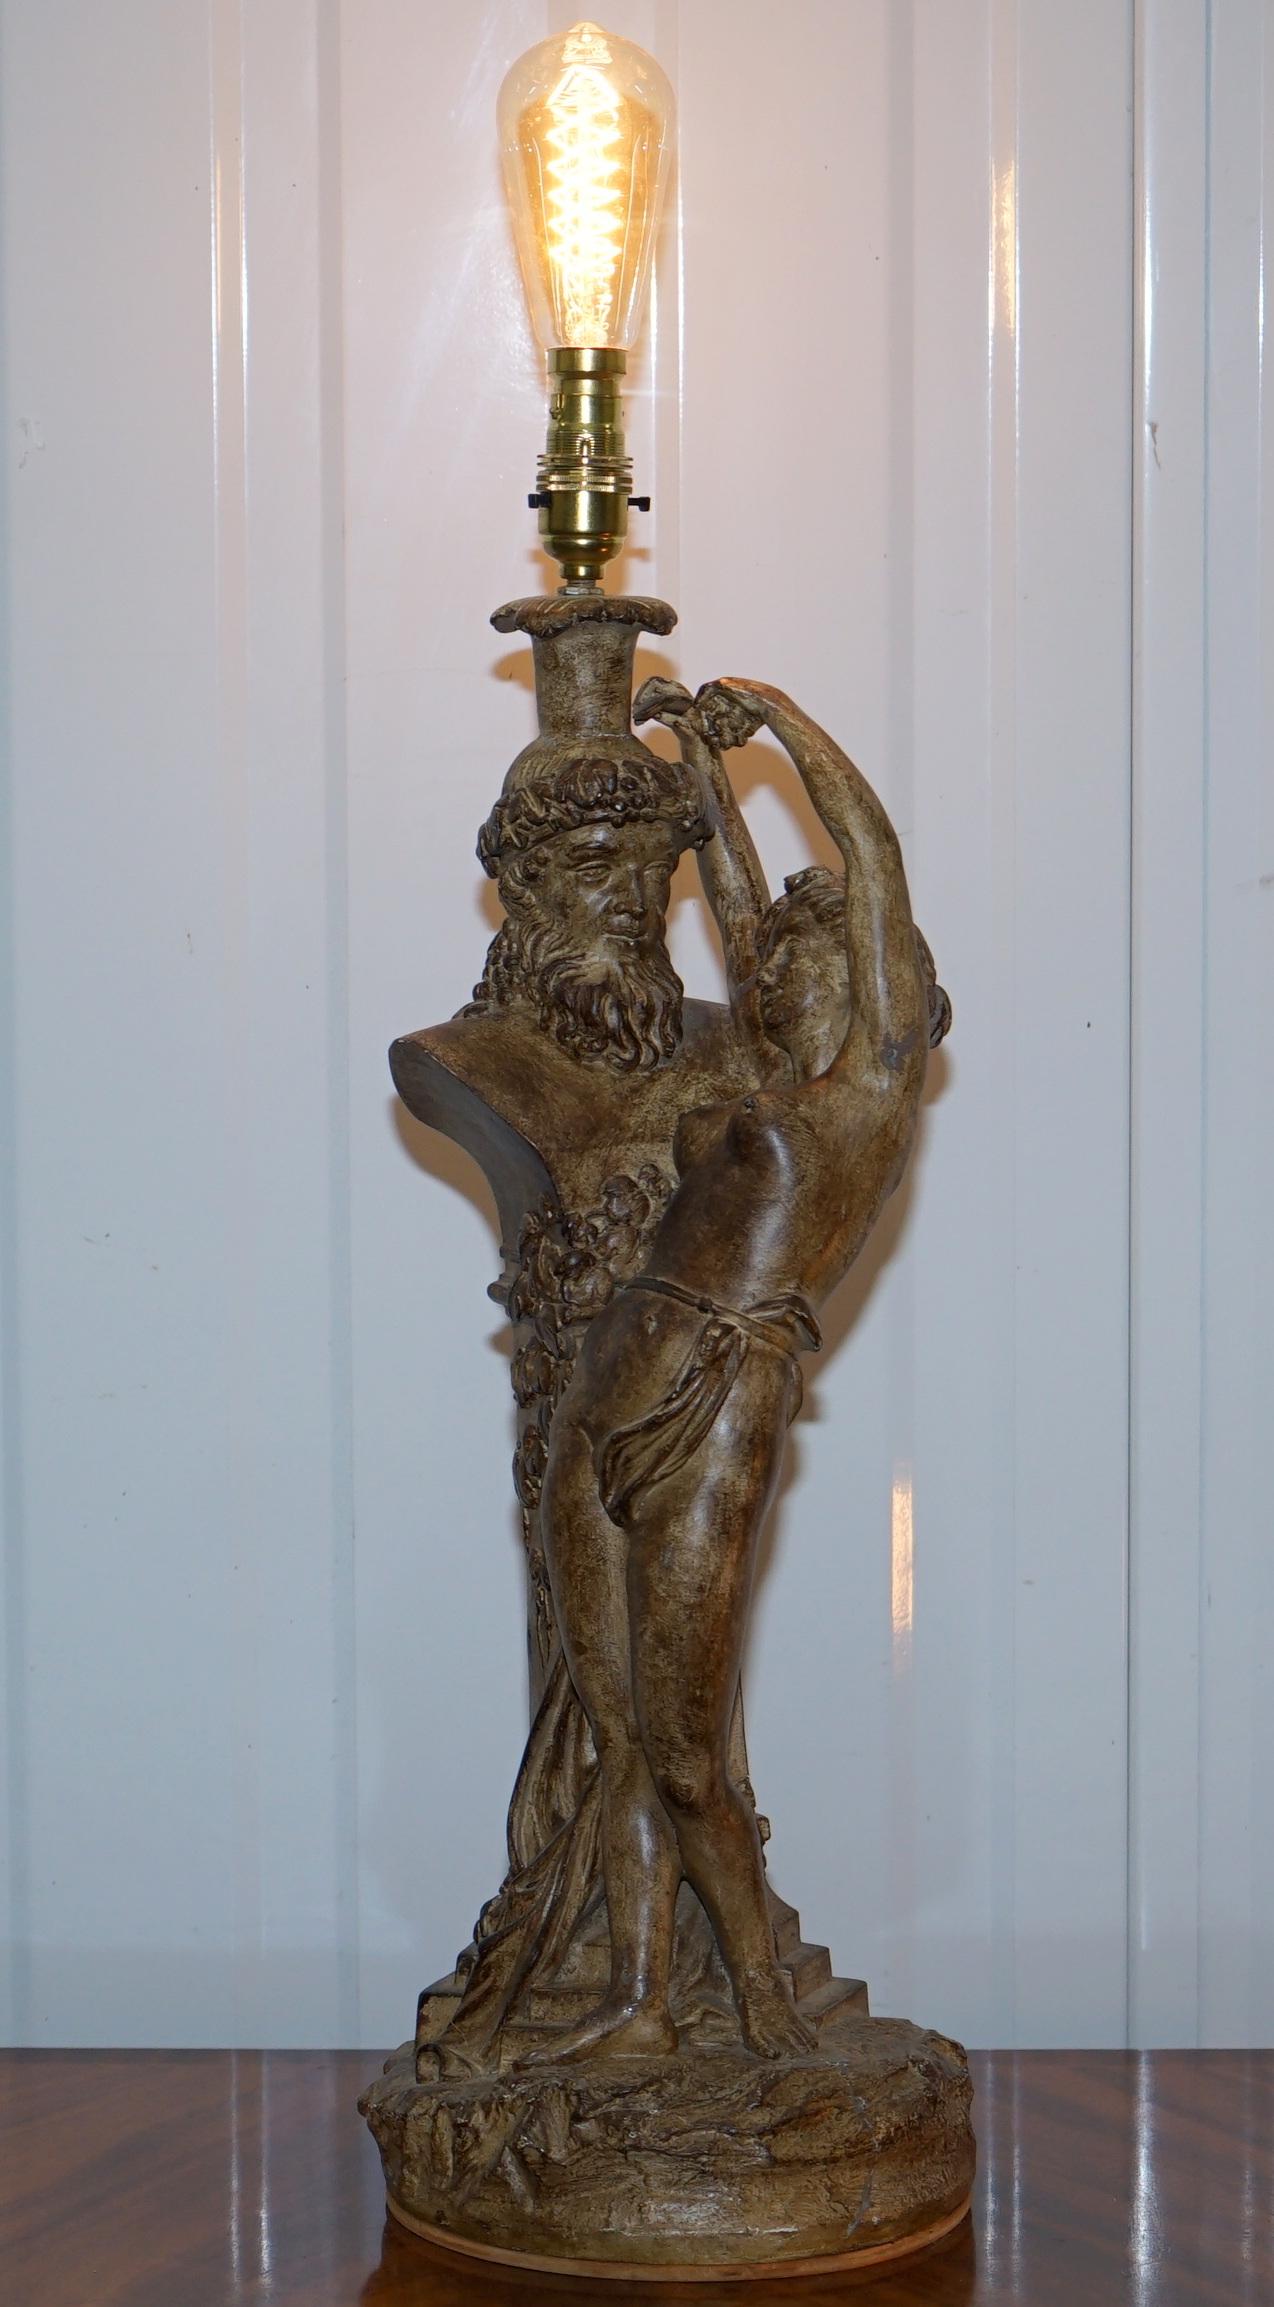 English Pair of Vintage Style Maiden Seducing Zeus Statue Table Lamps Nicely Decorative